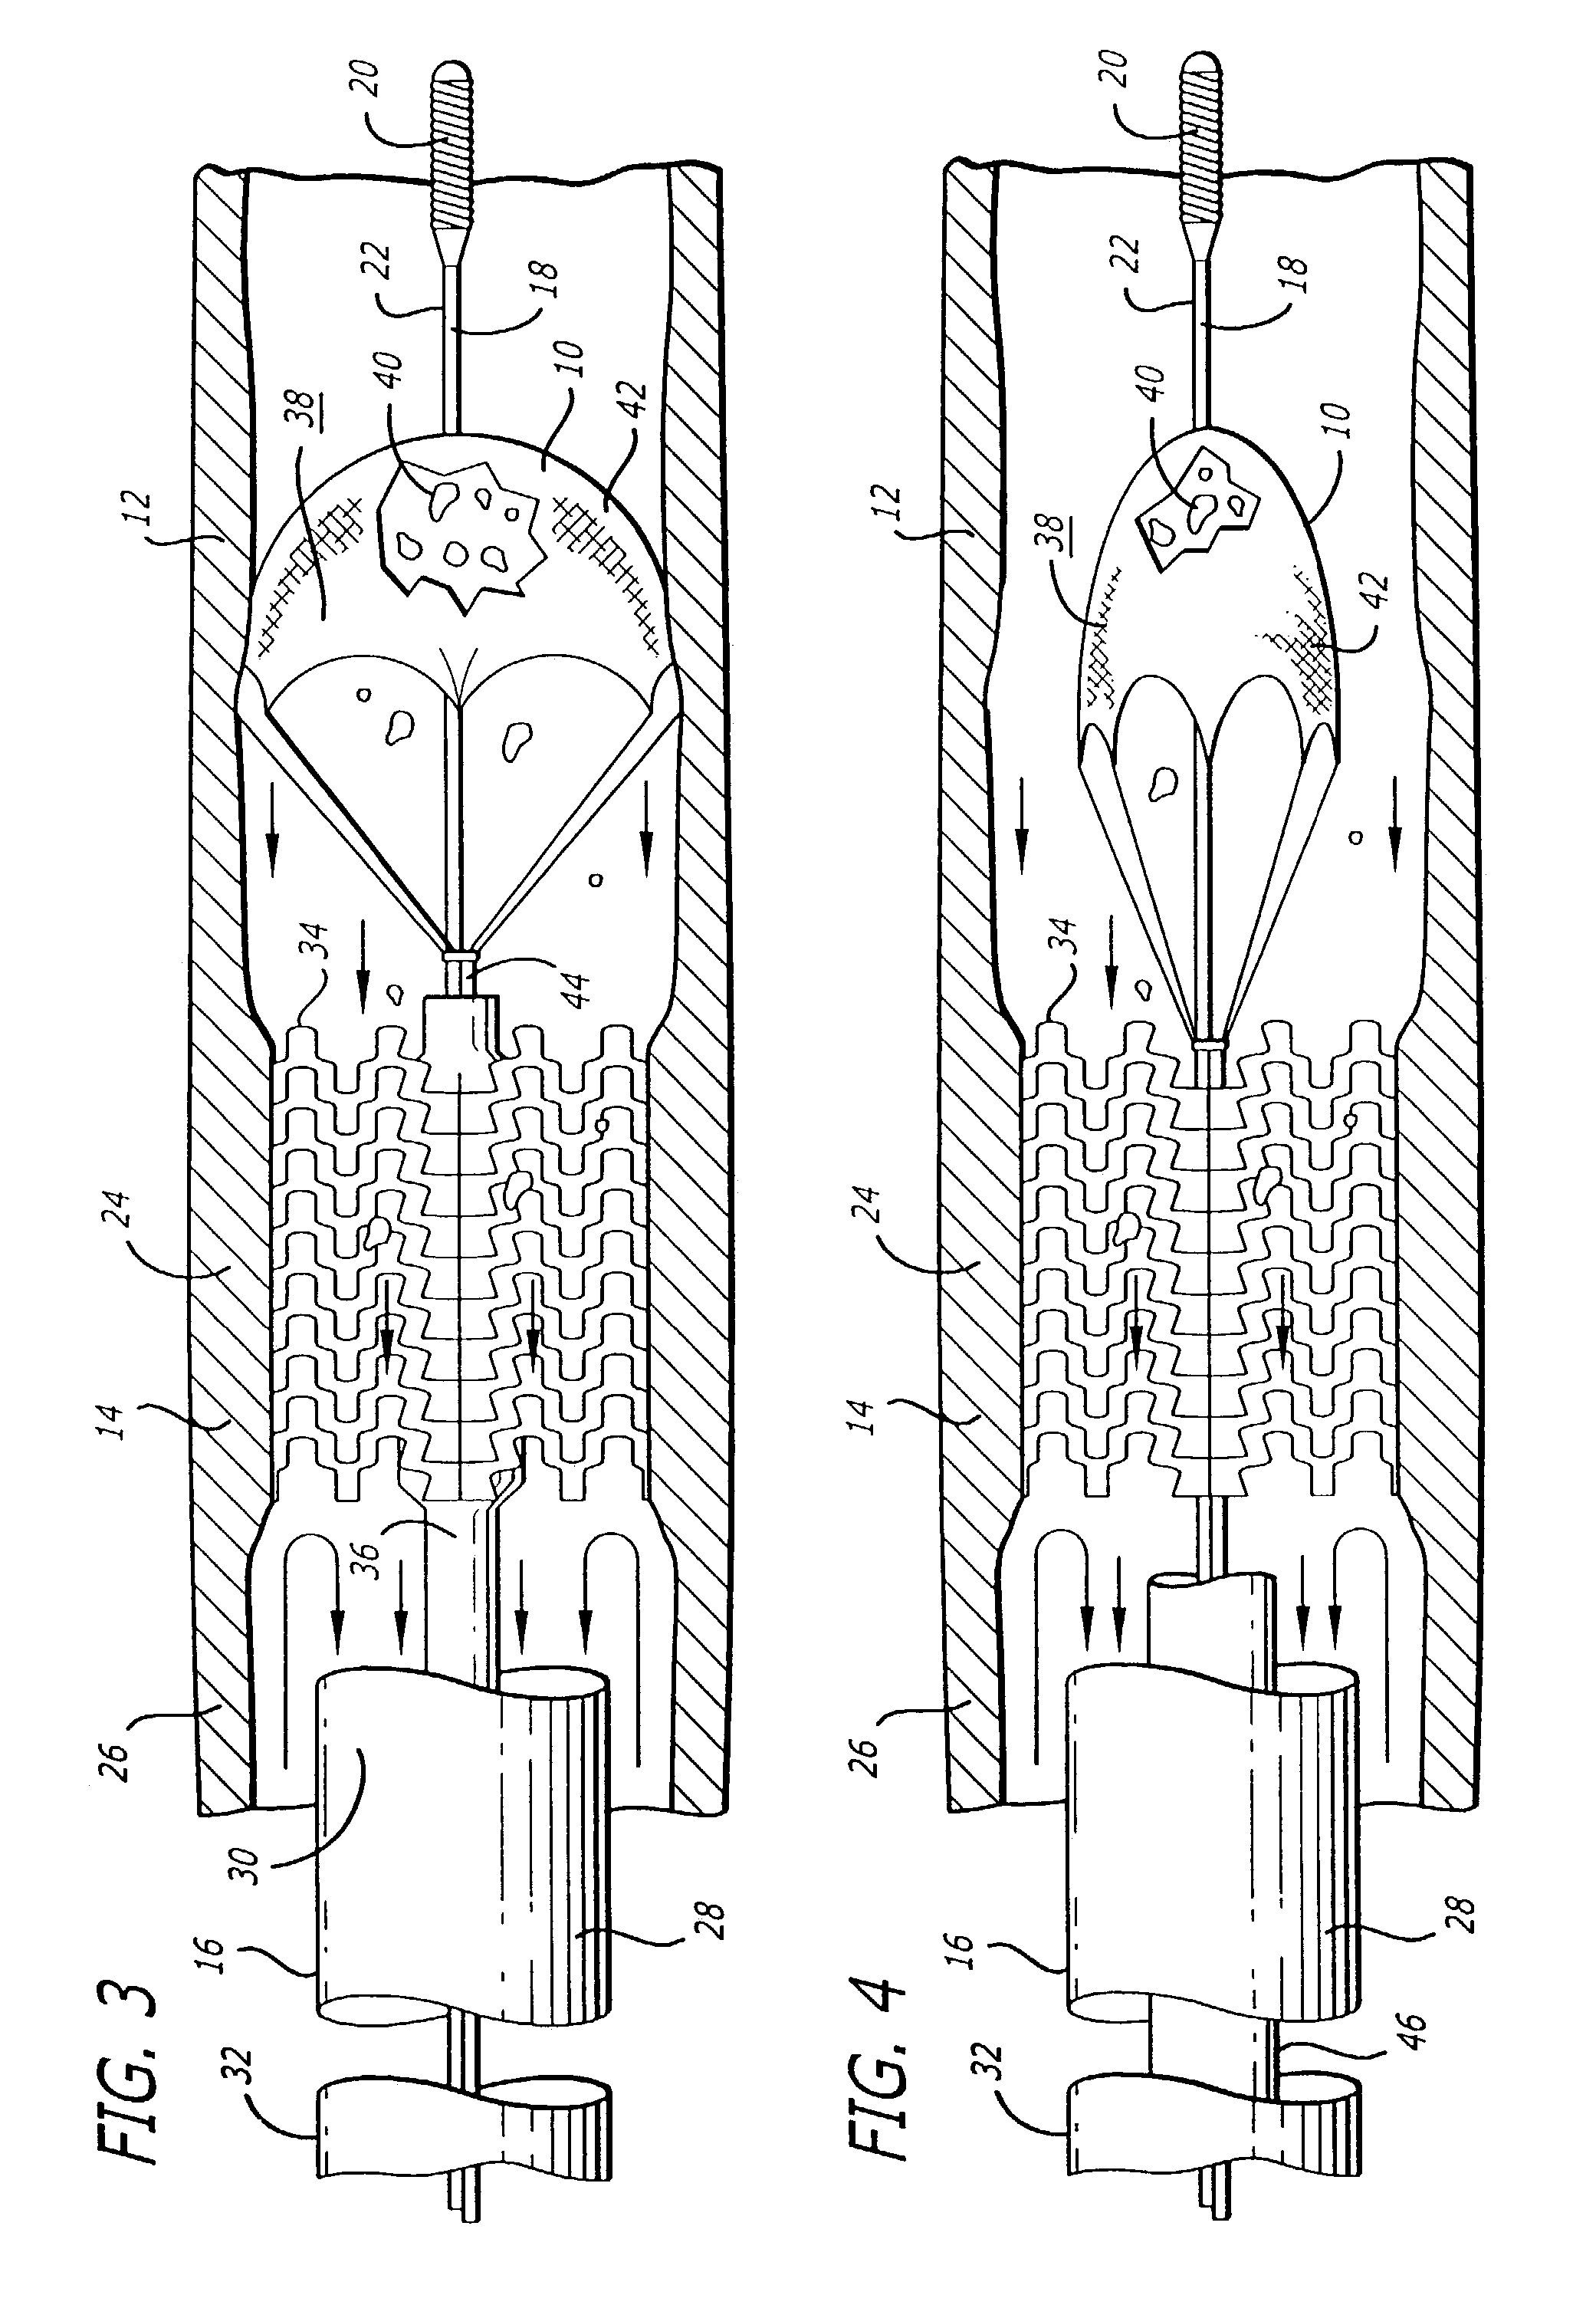 Vessel occlusion device for embolic protection system